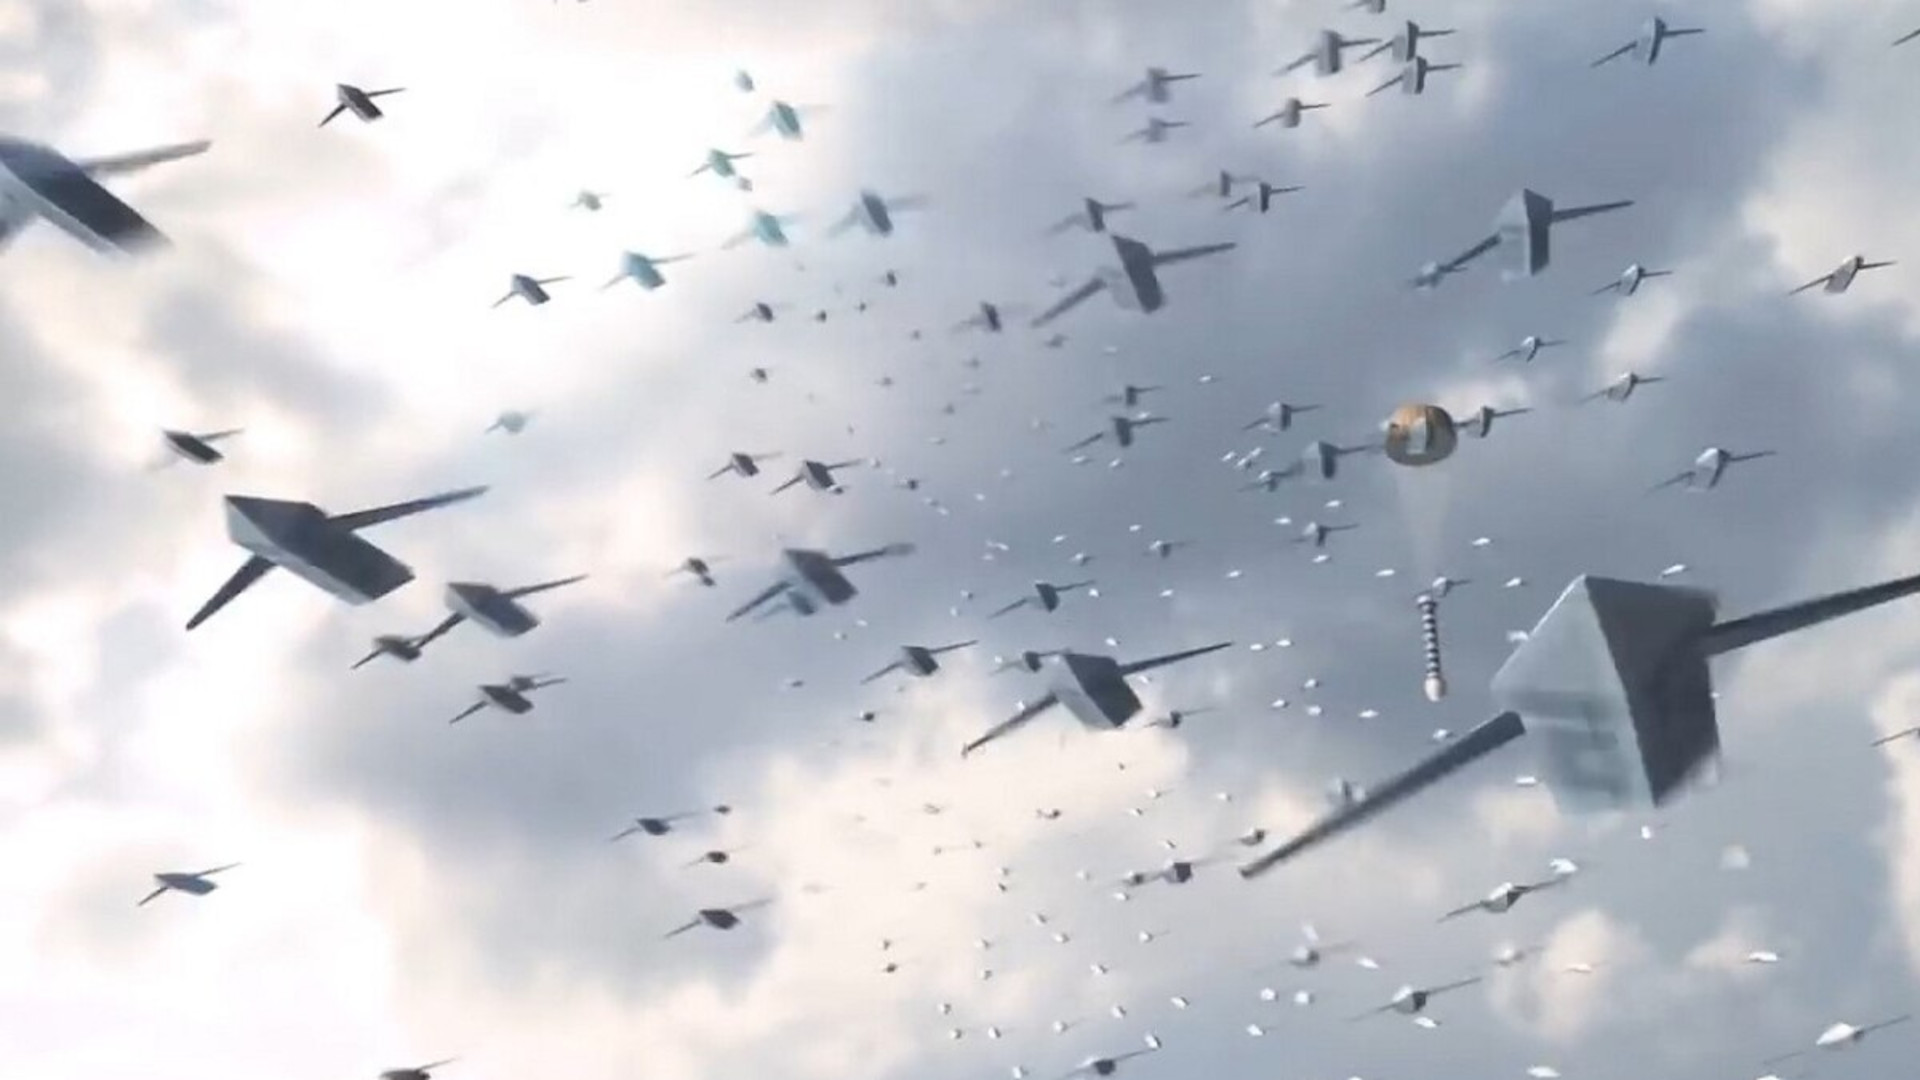 Marine Corps air-launched drone swarms title=Marines Betting Big On “Critical” Air-Launched Swarming Drones